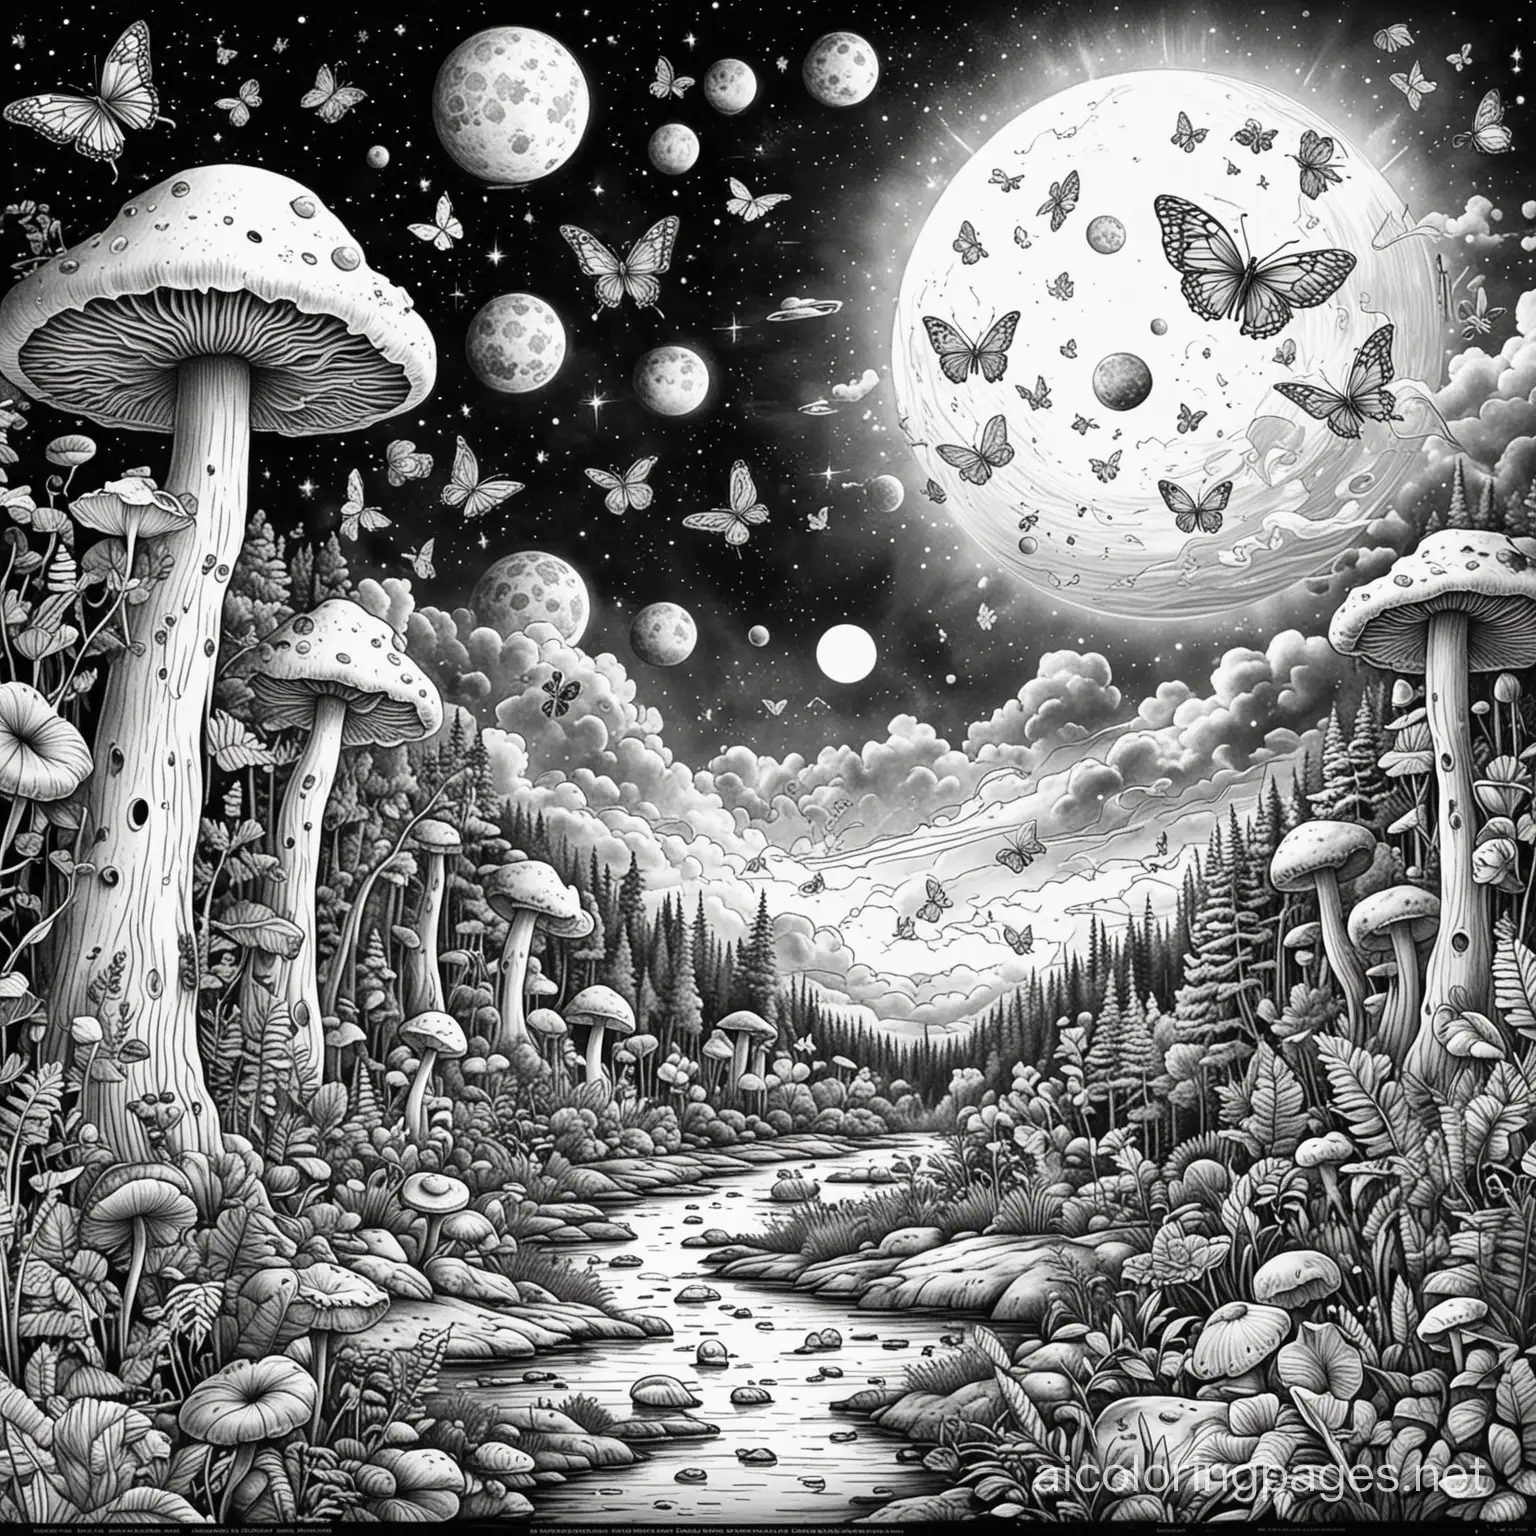 Outer space planets clouds with butterflies sun and moon mushroom forest, Coloring Page, black and white, line art, white background, Simplicity, Ample White Space. The background of the coloring page is plain white to make it easy for young children to color within the lines. The outlines of all the subjects are easy to distinguish, making it simple for kids to color without too much difficulty